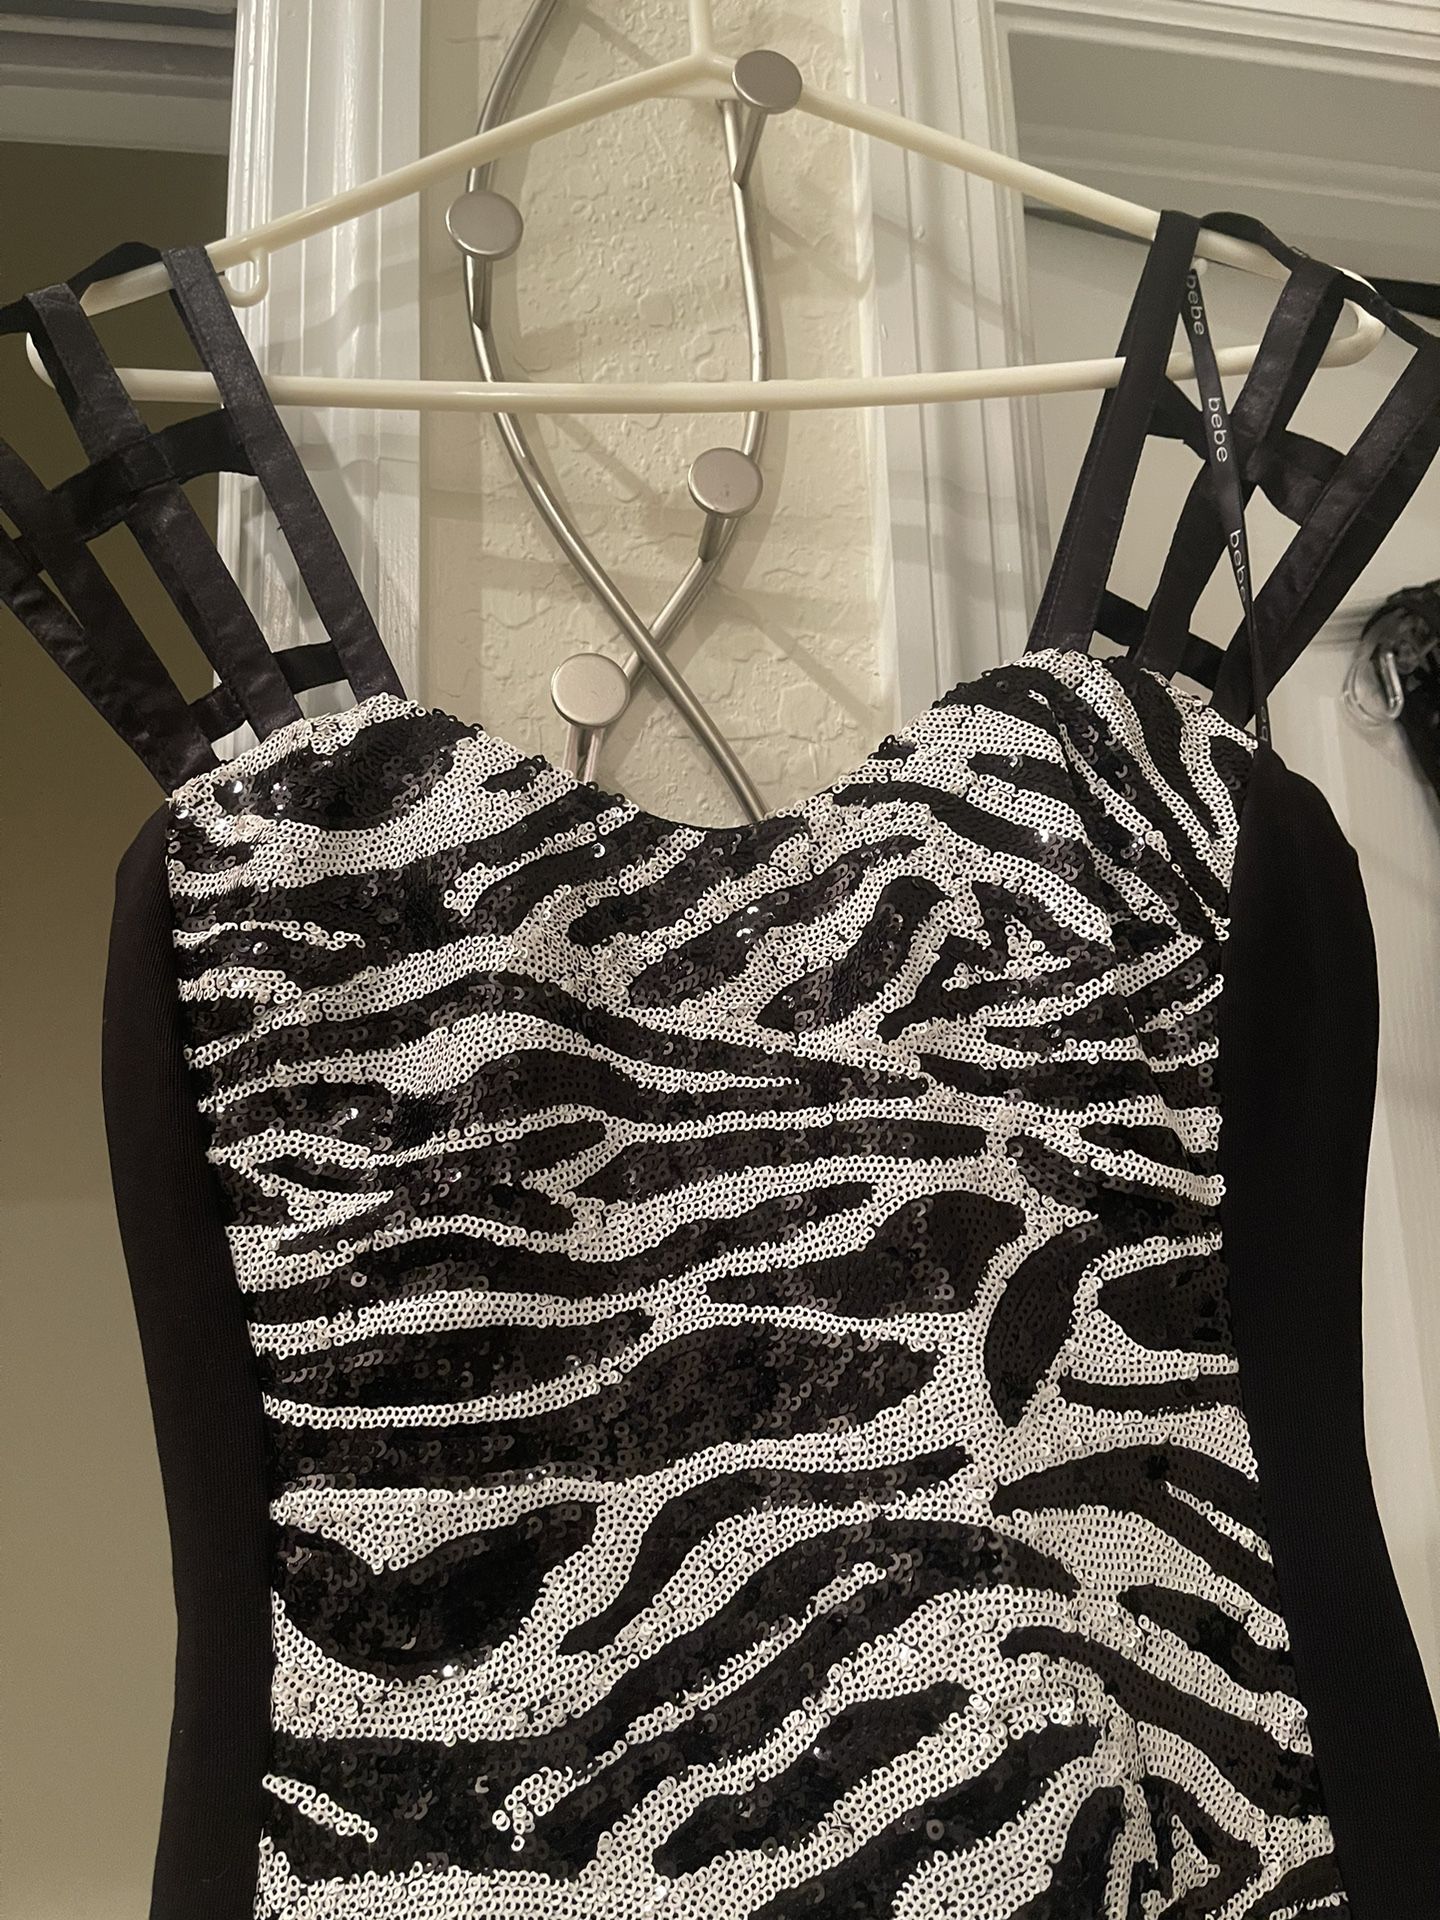 New  Bebe Party Black And White Sequin Dress S